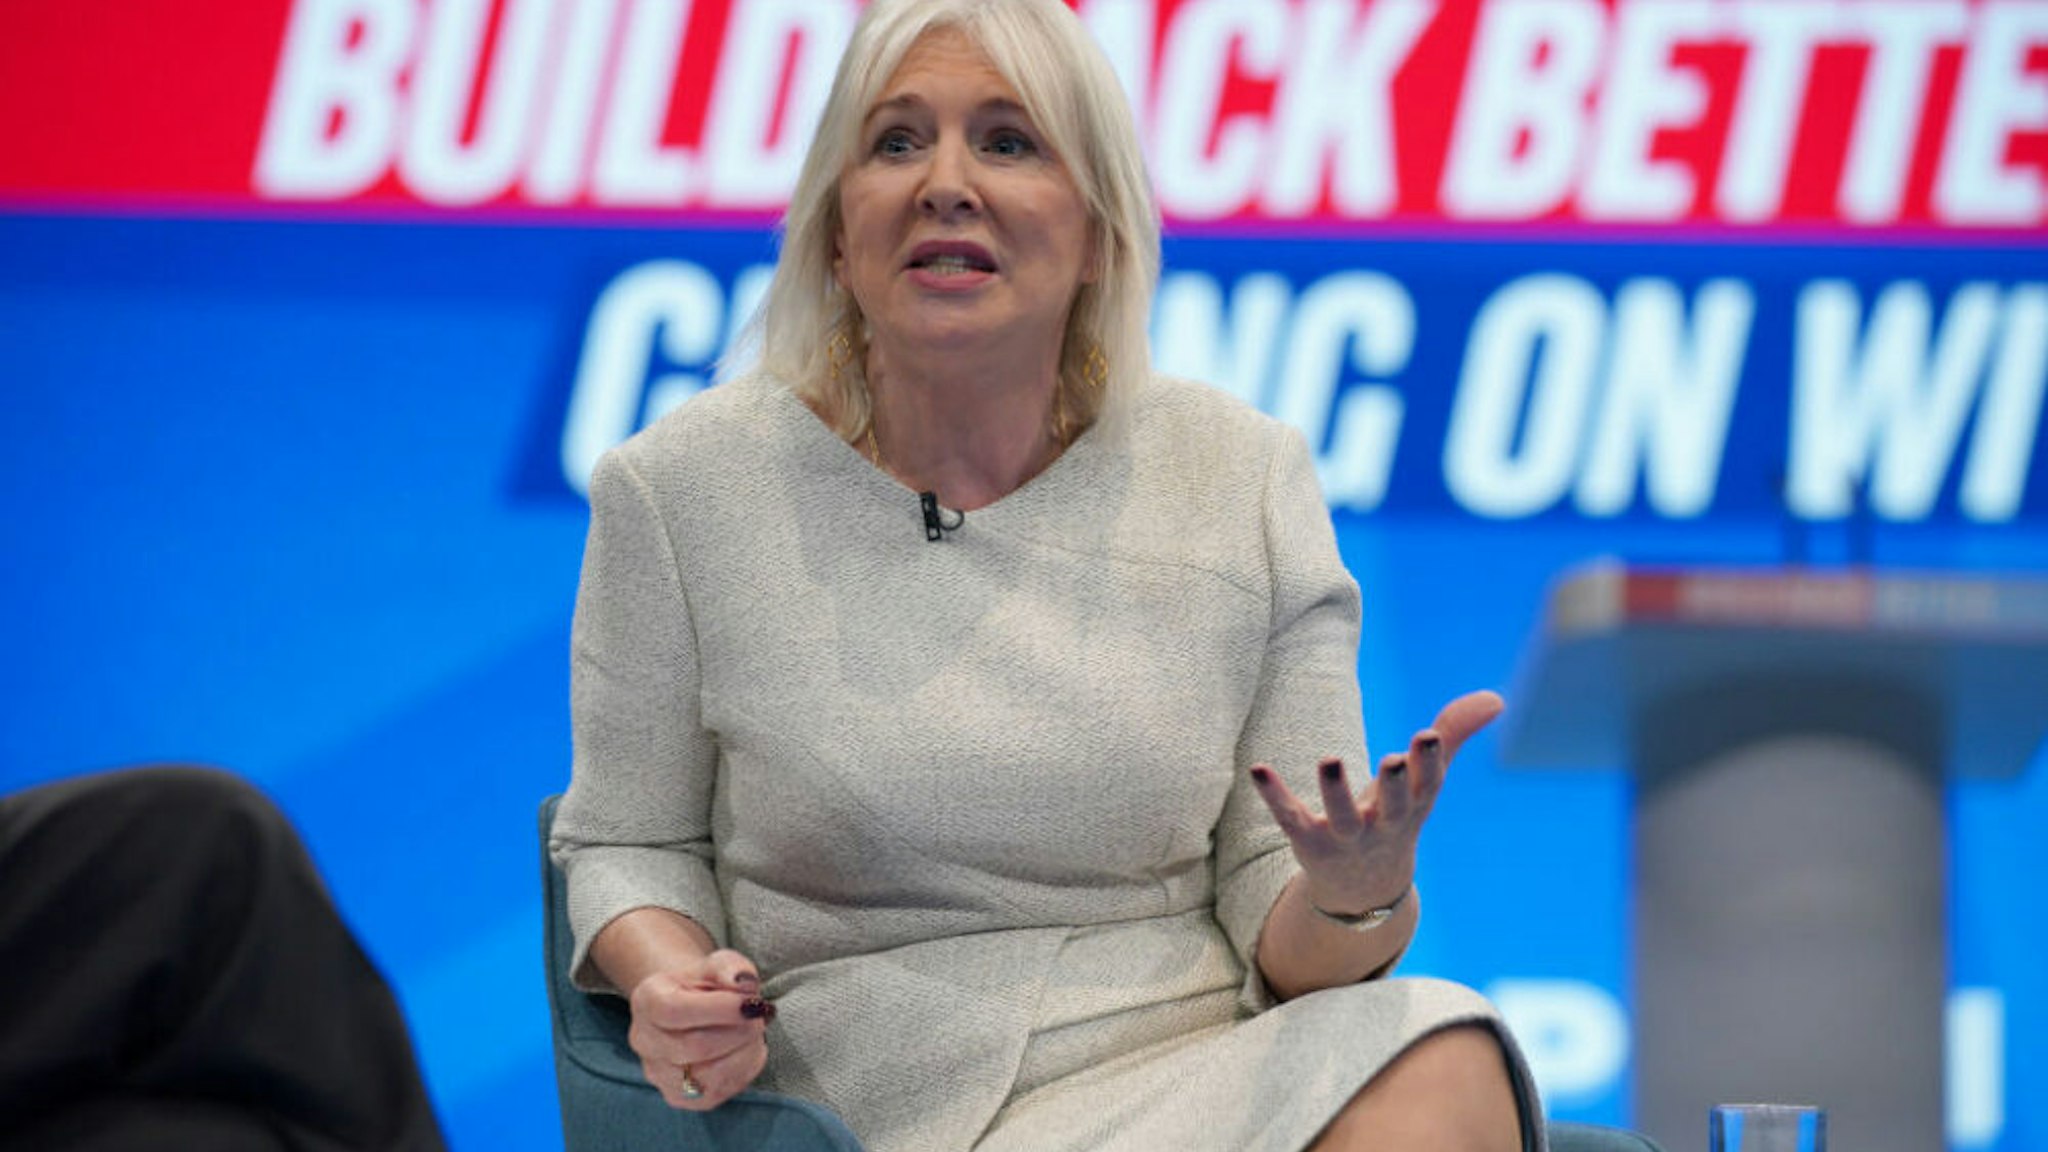 Culture Secretary Nadine Dorries on the main stage during the Conservative Party Conference in Manchester. Picture date: Tuesday October 5, 2021.